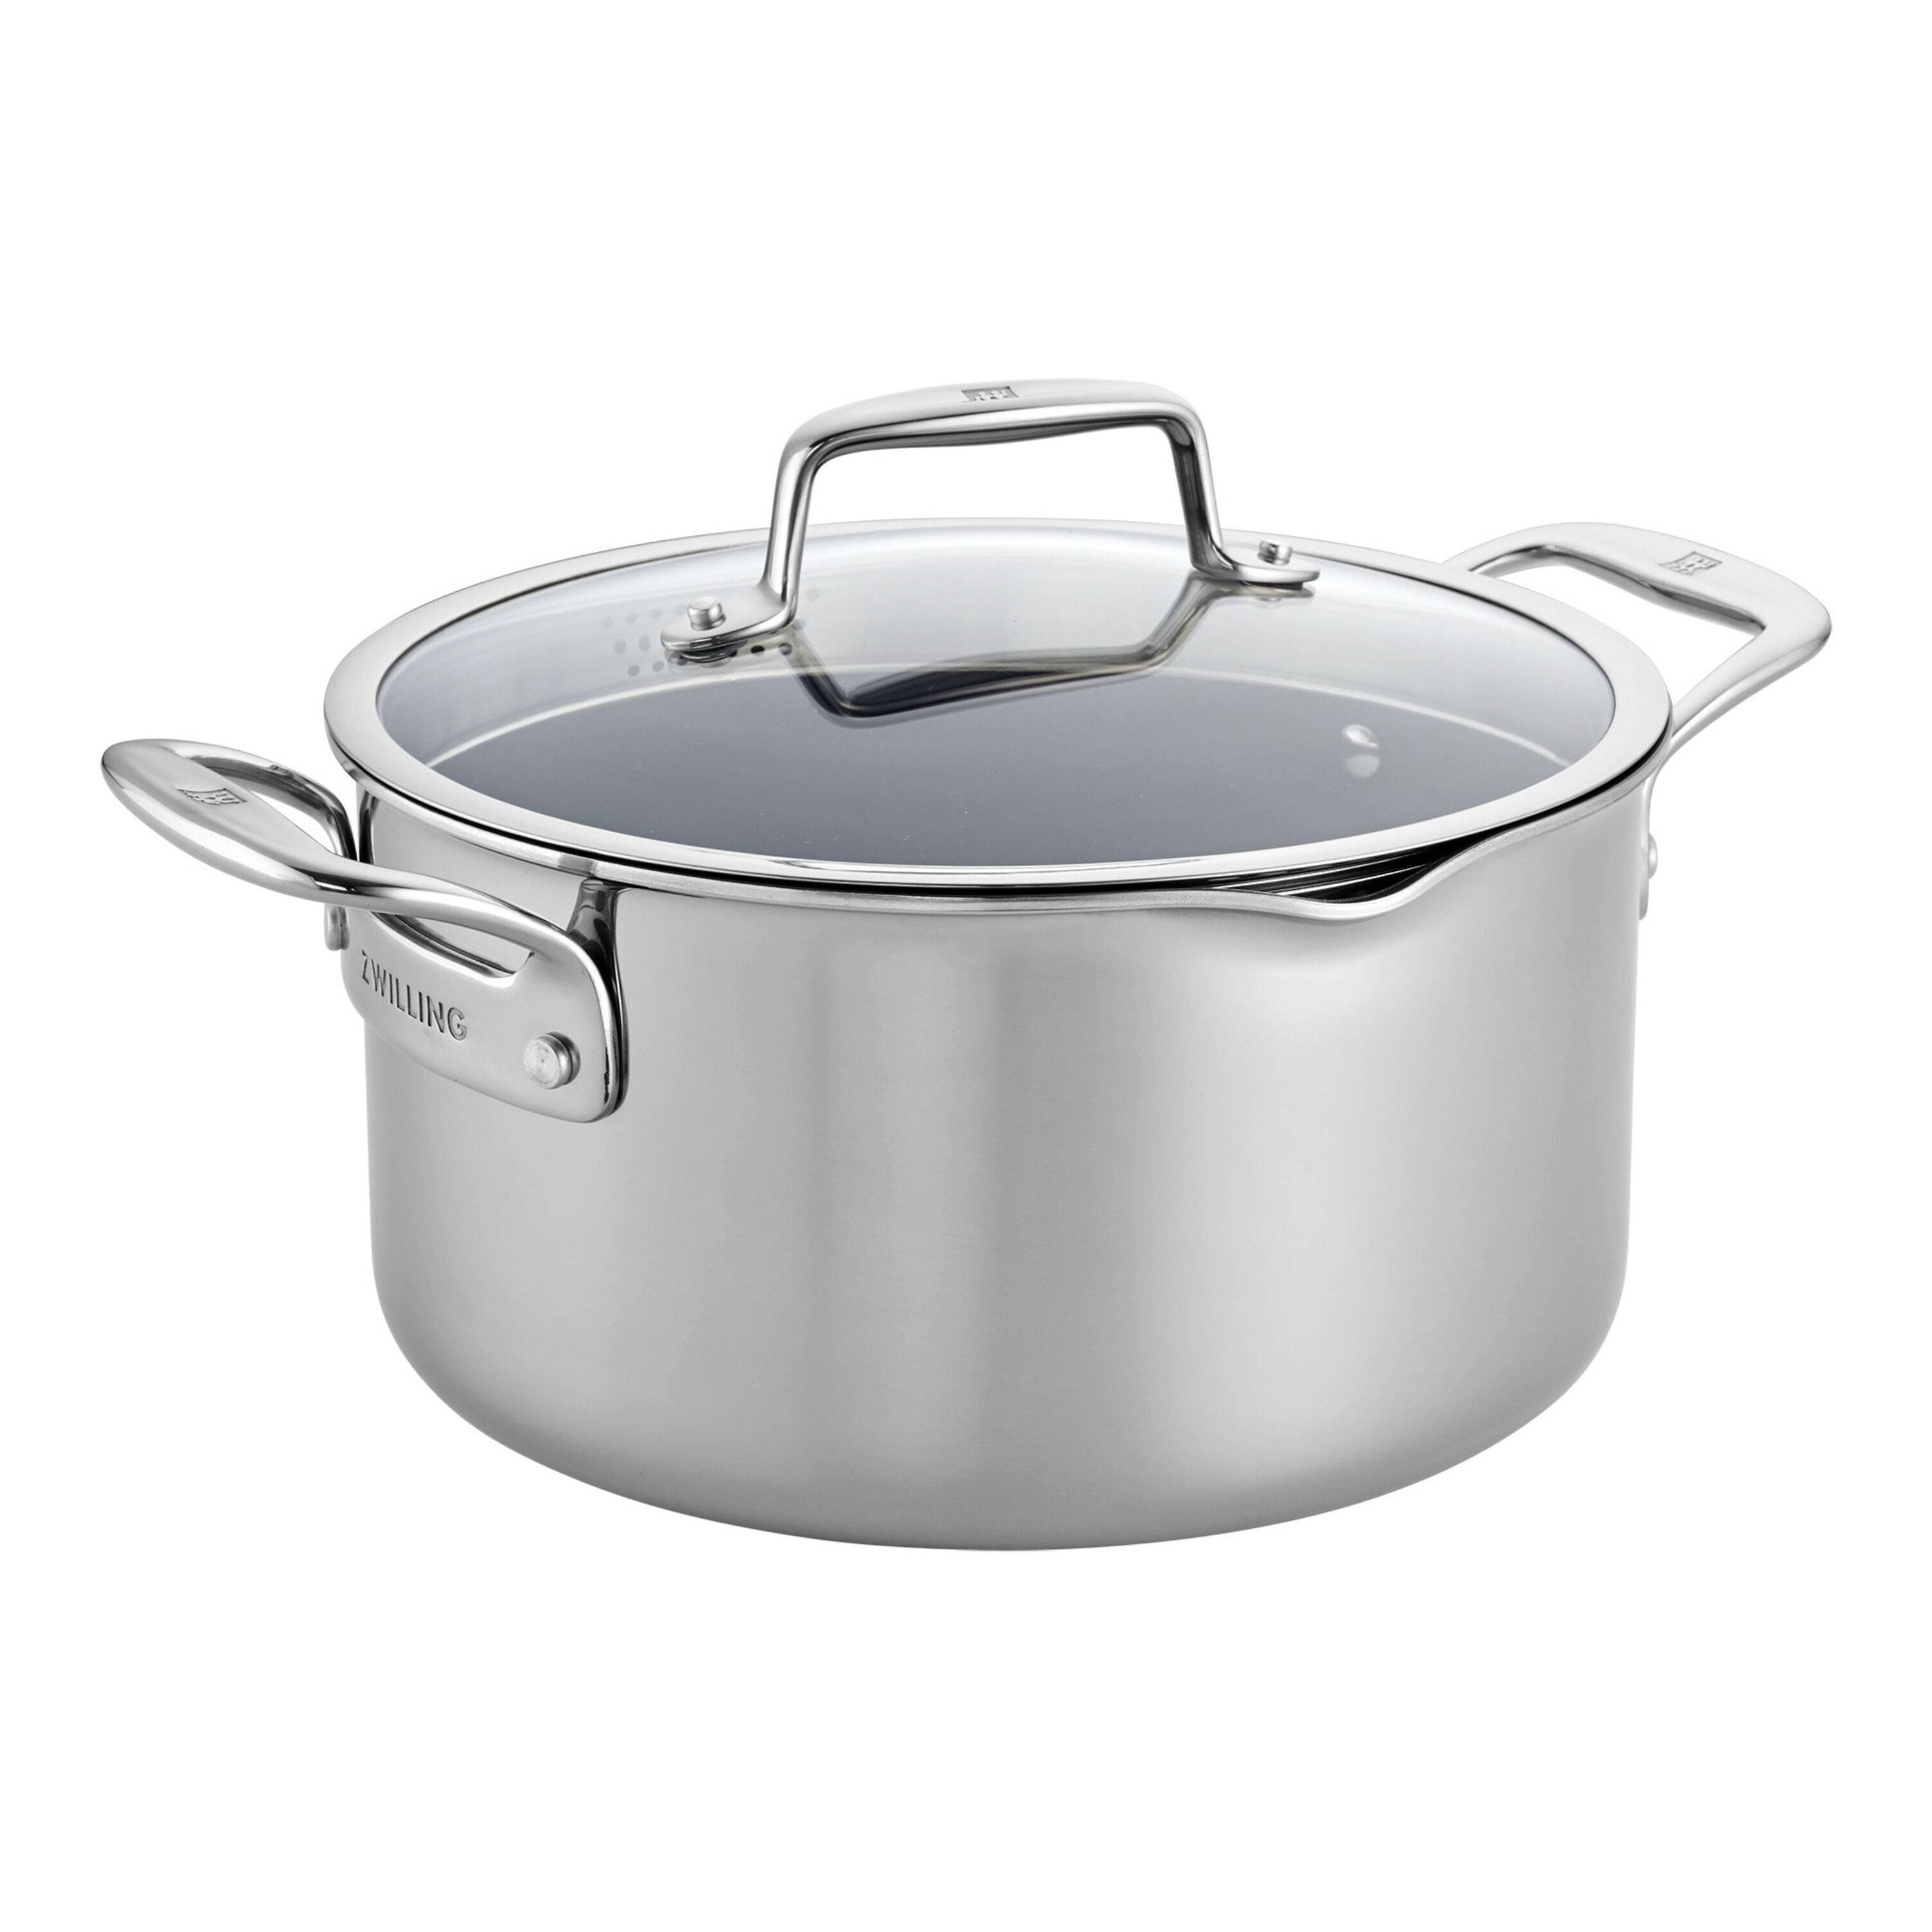 A Covered Stewpot: The Most Versatile Piece of Cookware You'll Ever Own